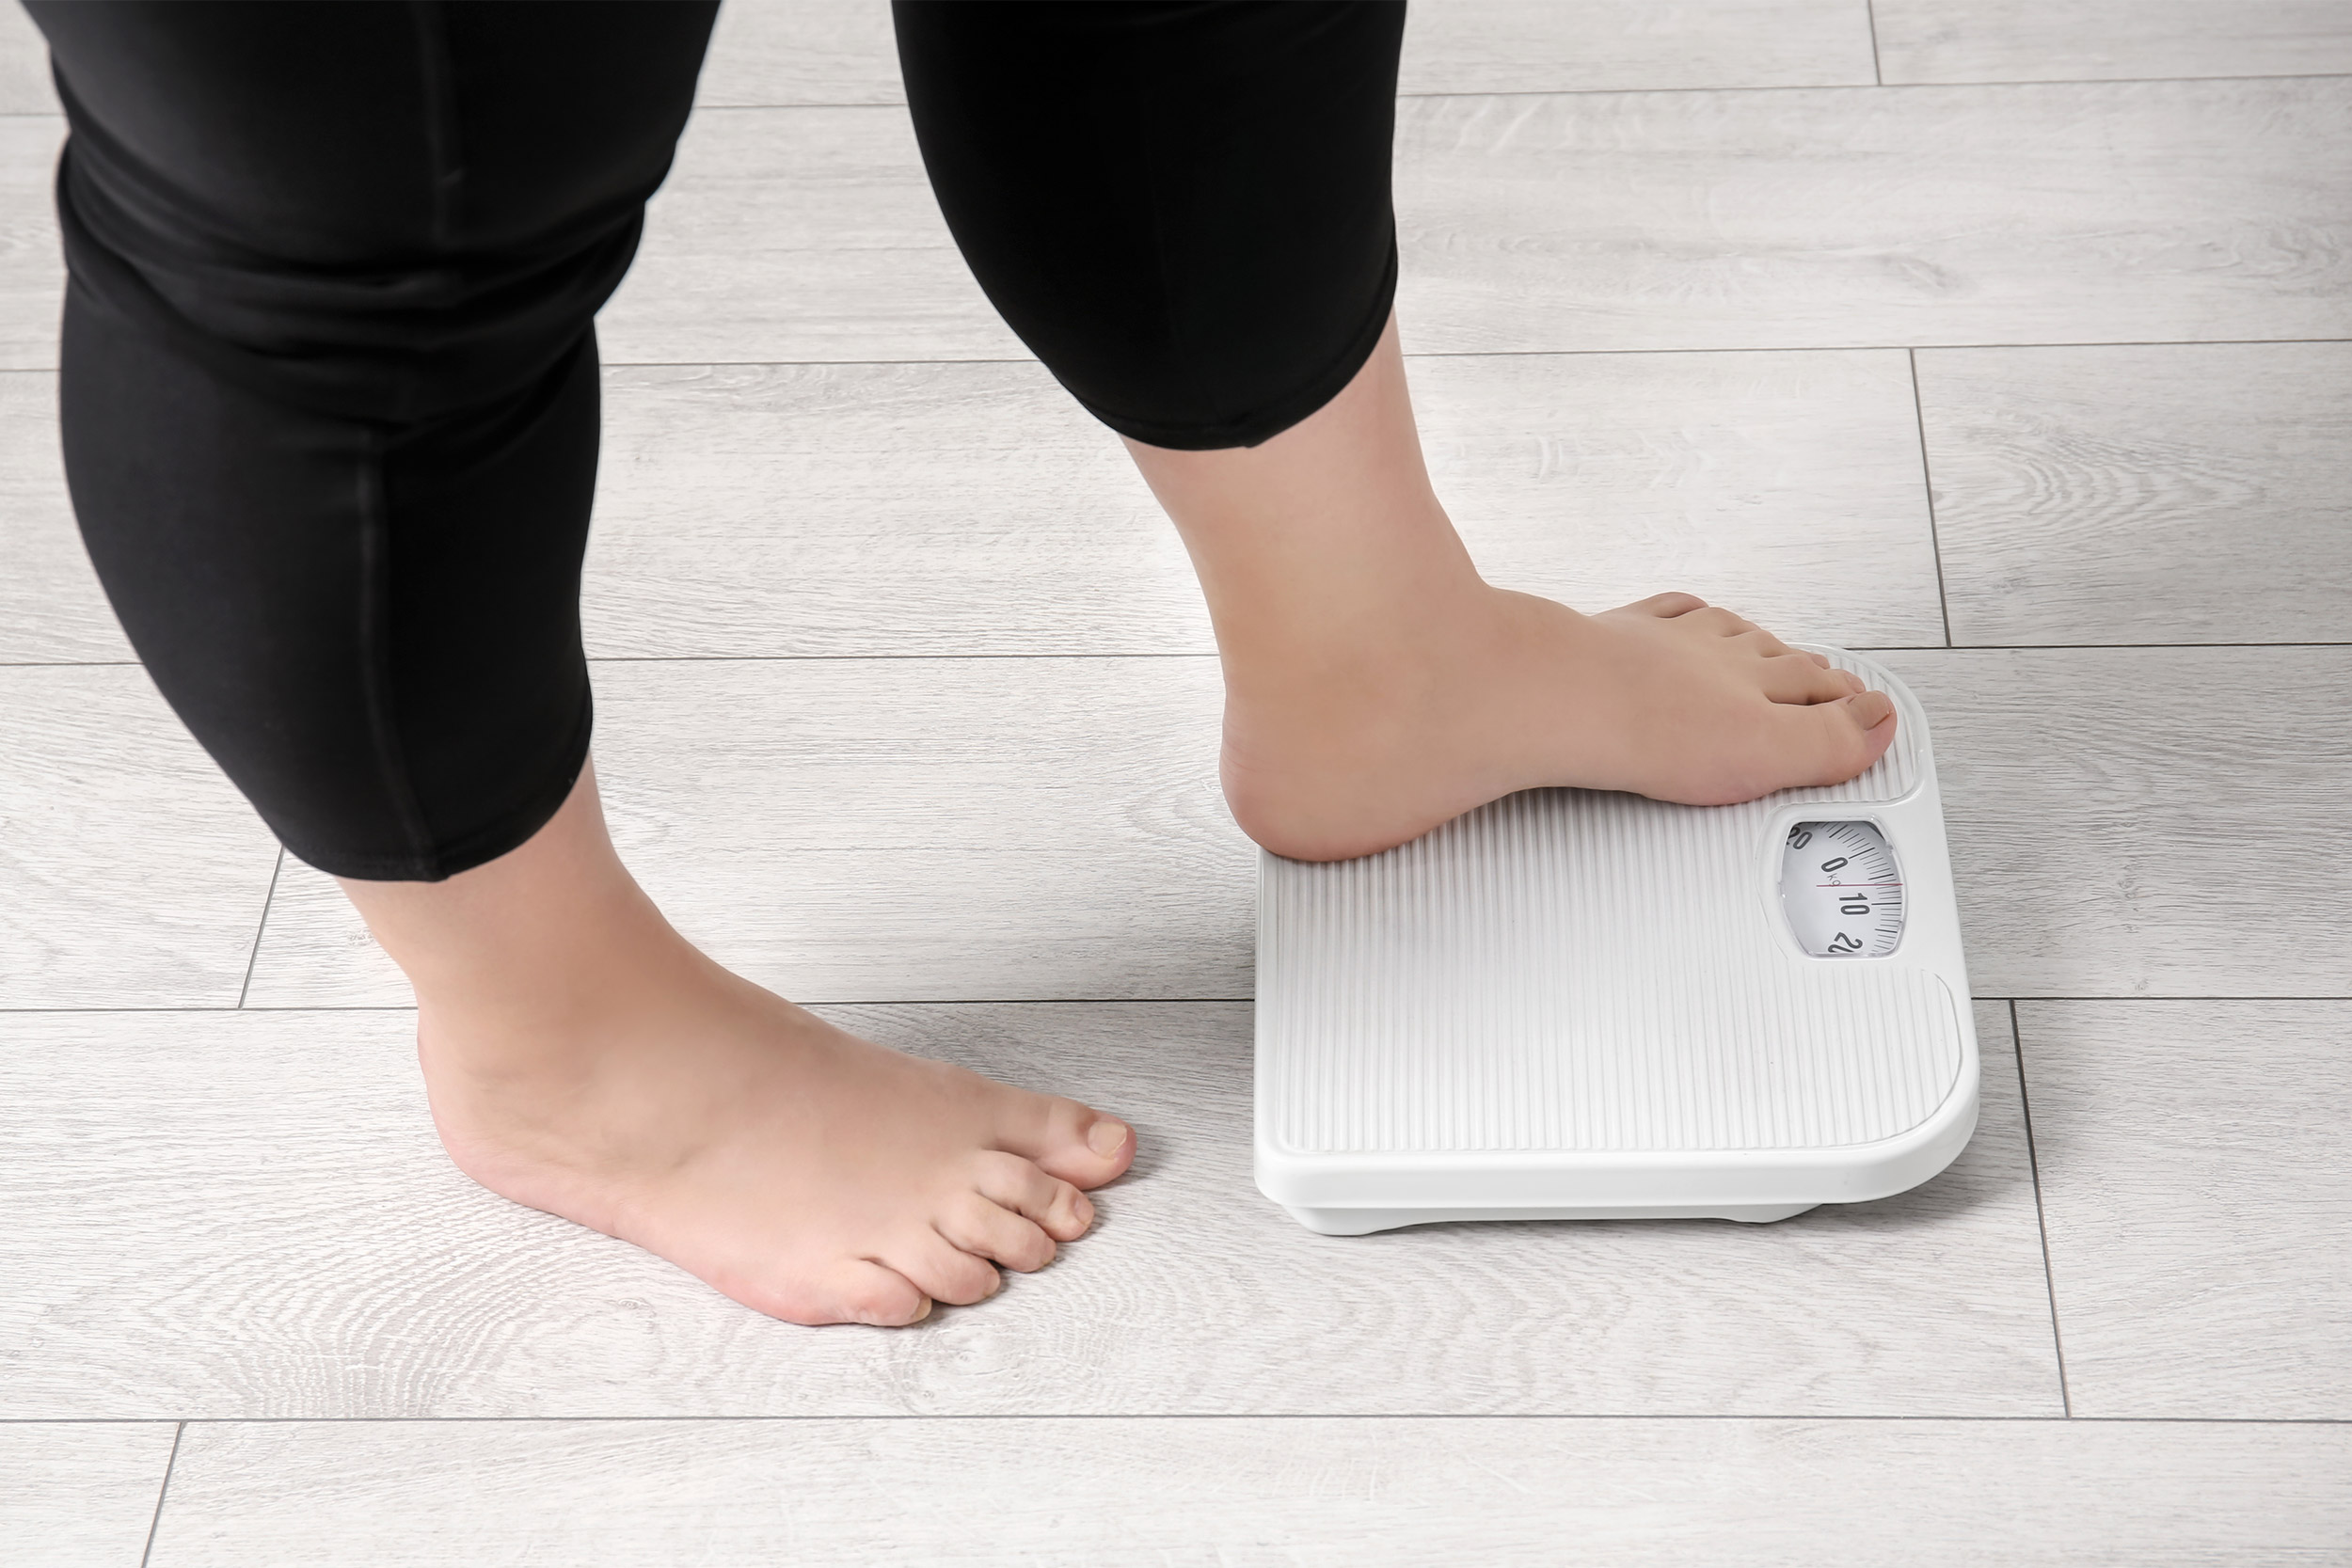 Overweight woman using scales indoors.